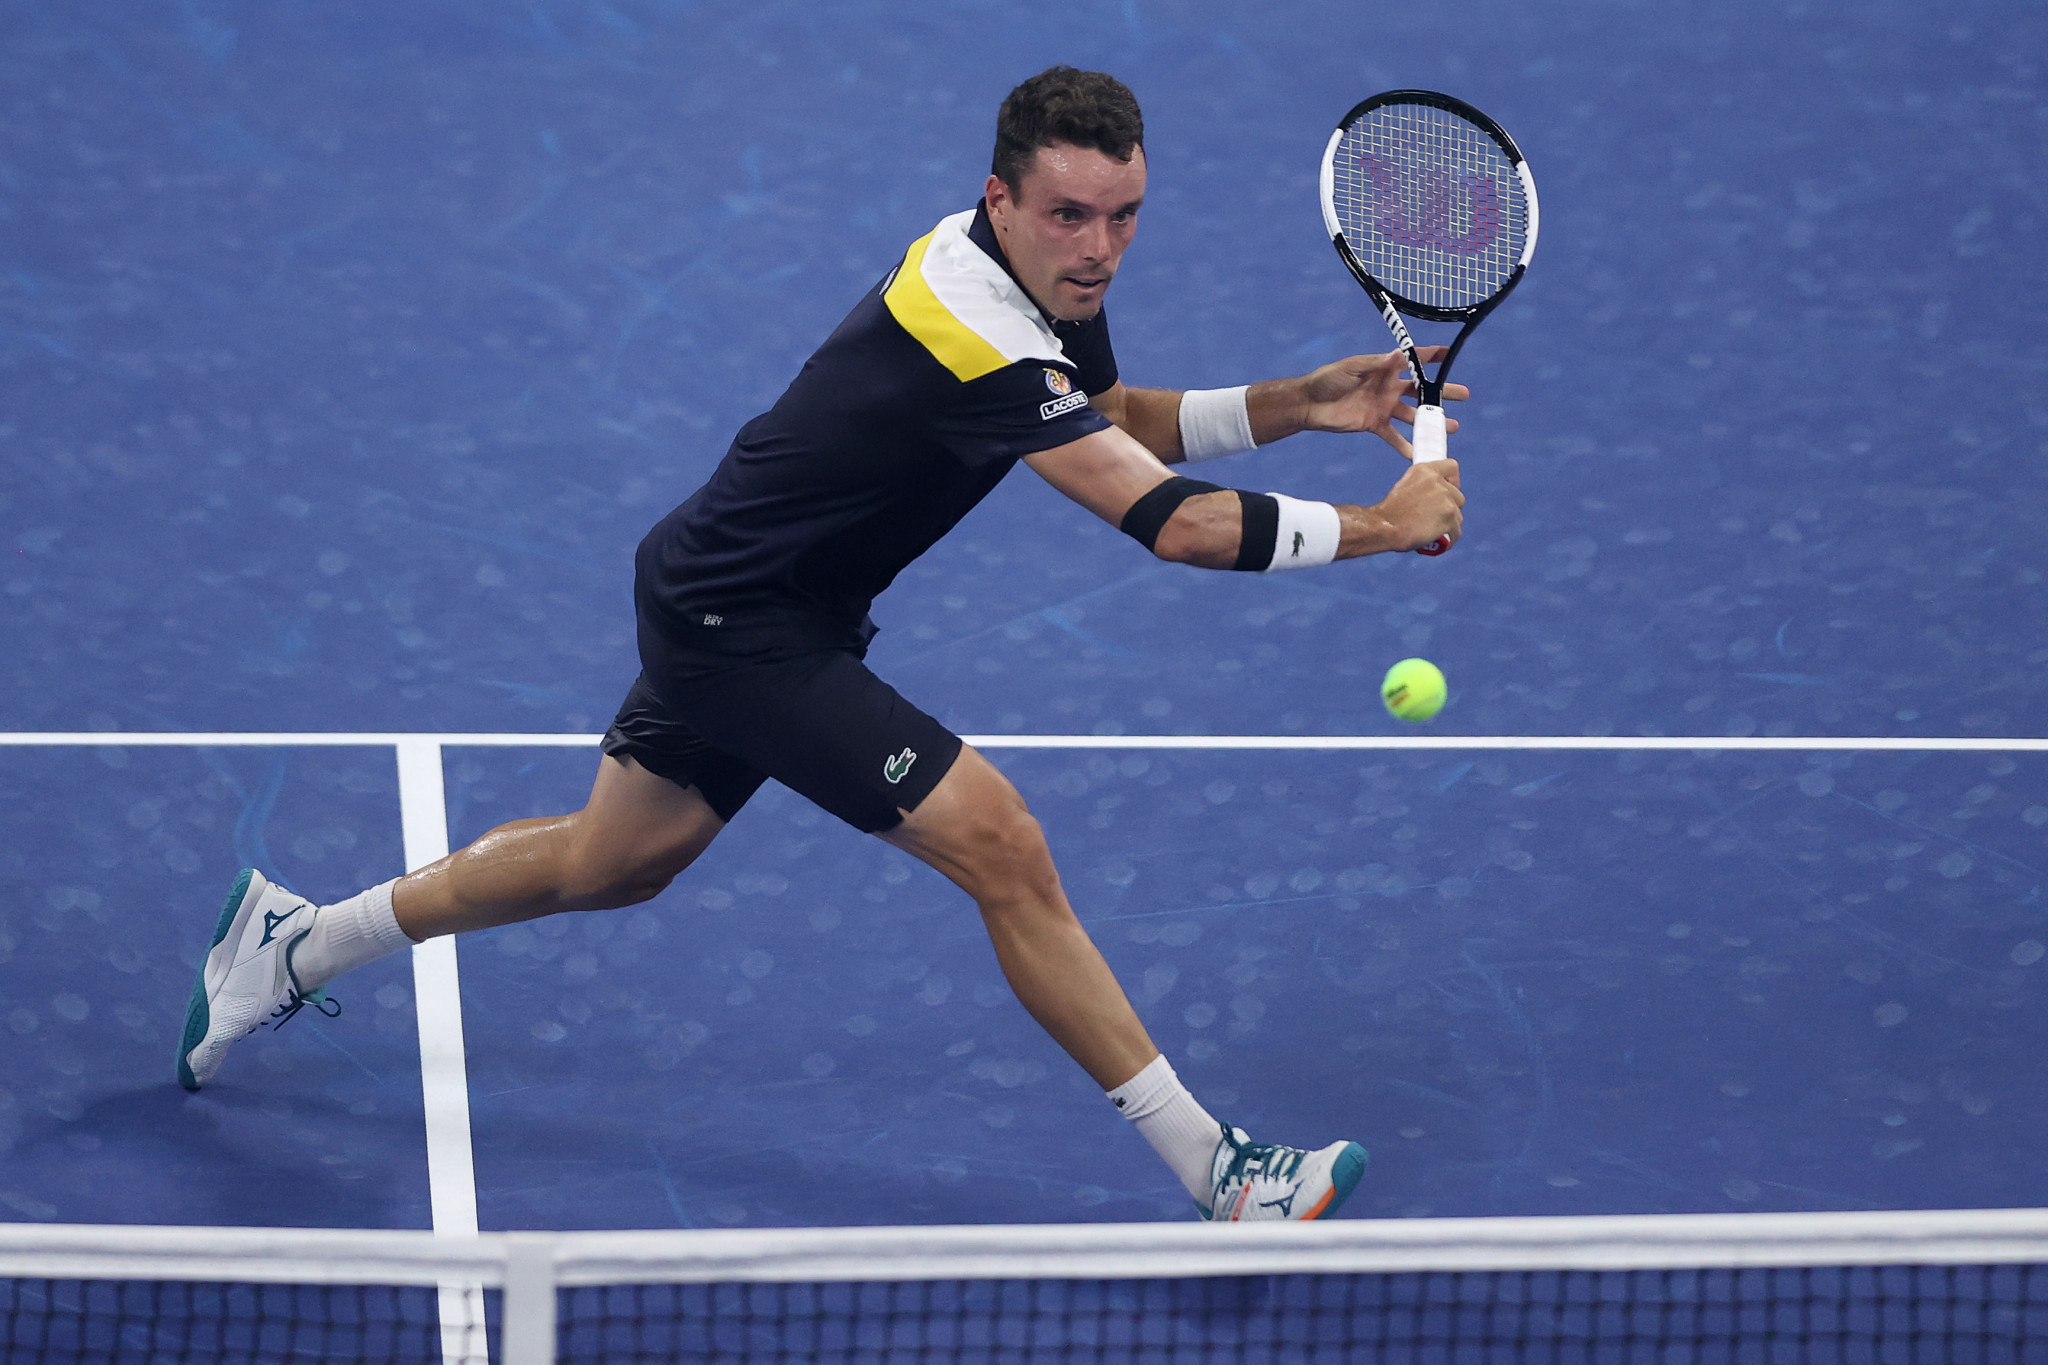 Roberto Bautista Agut took a big scalp in Nick Kyrgios before beating Emil Ruusuvuori in the second round ©Getty Images